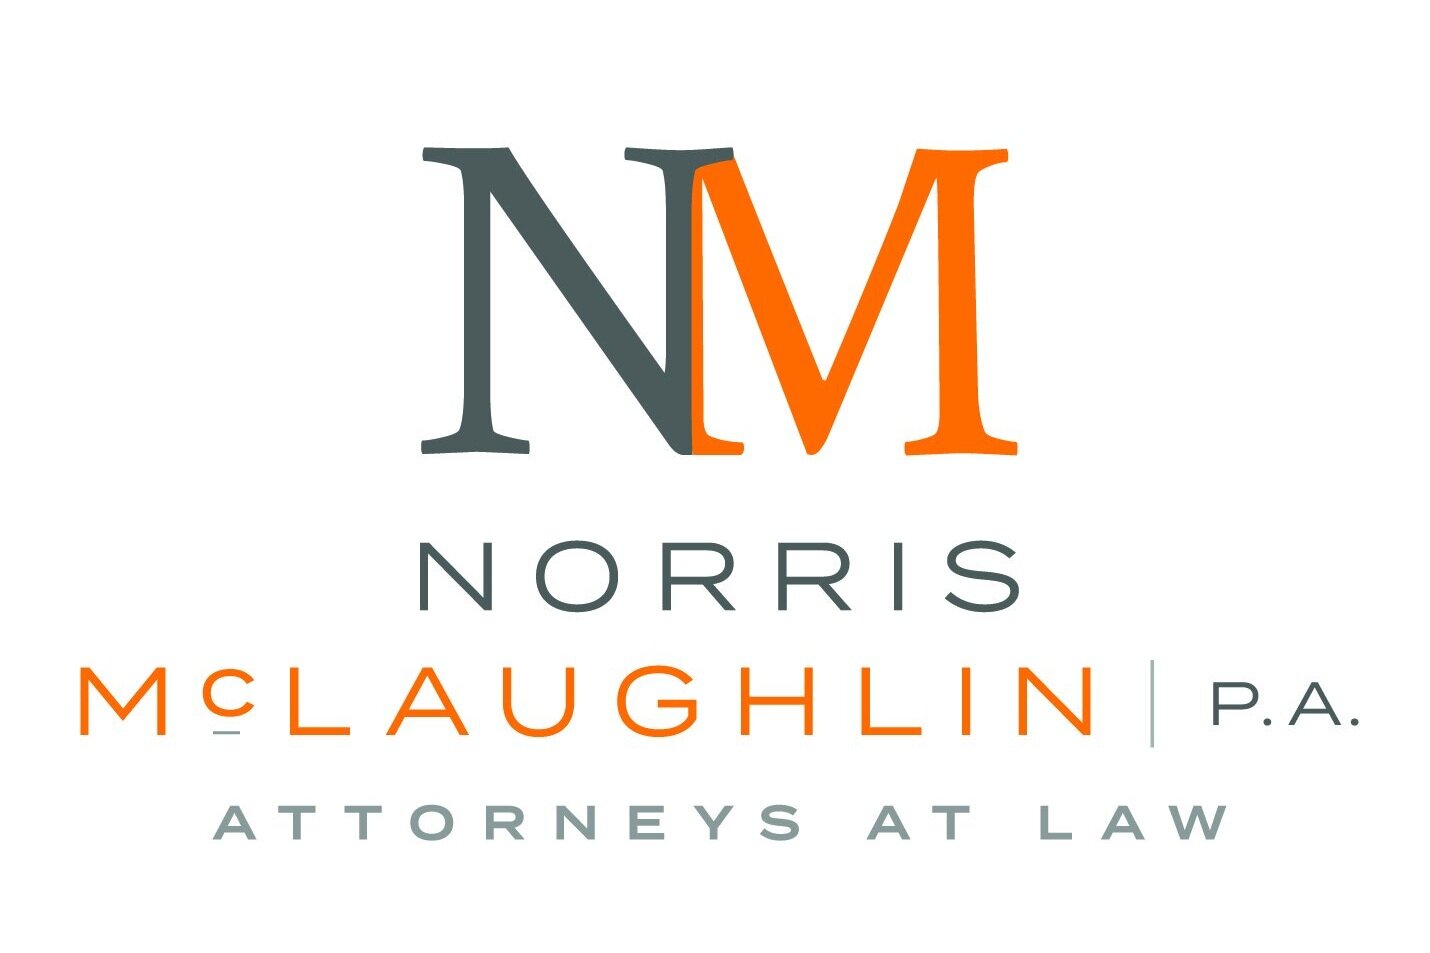 Norris McLaughlin PA - Attorneys at Law